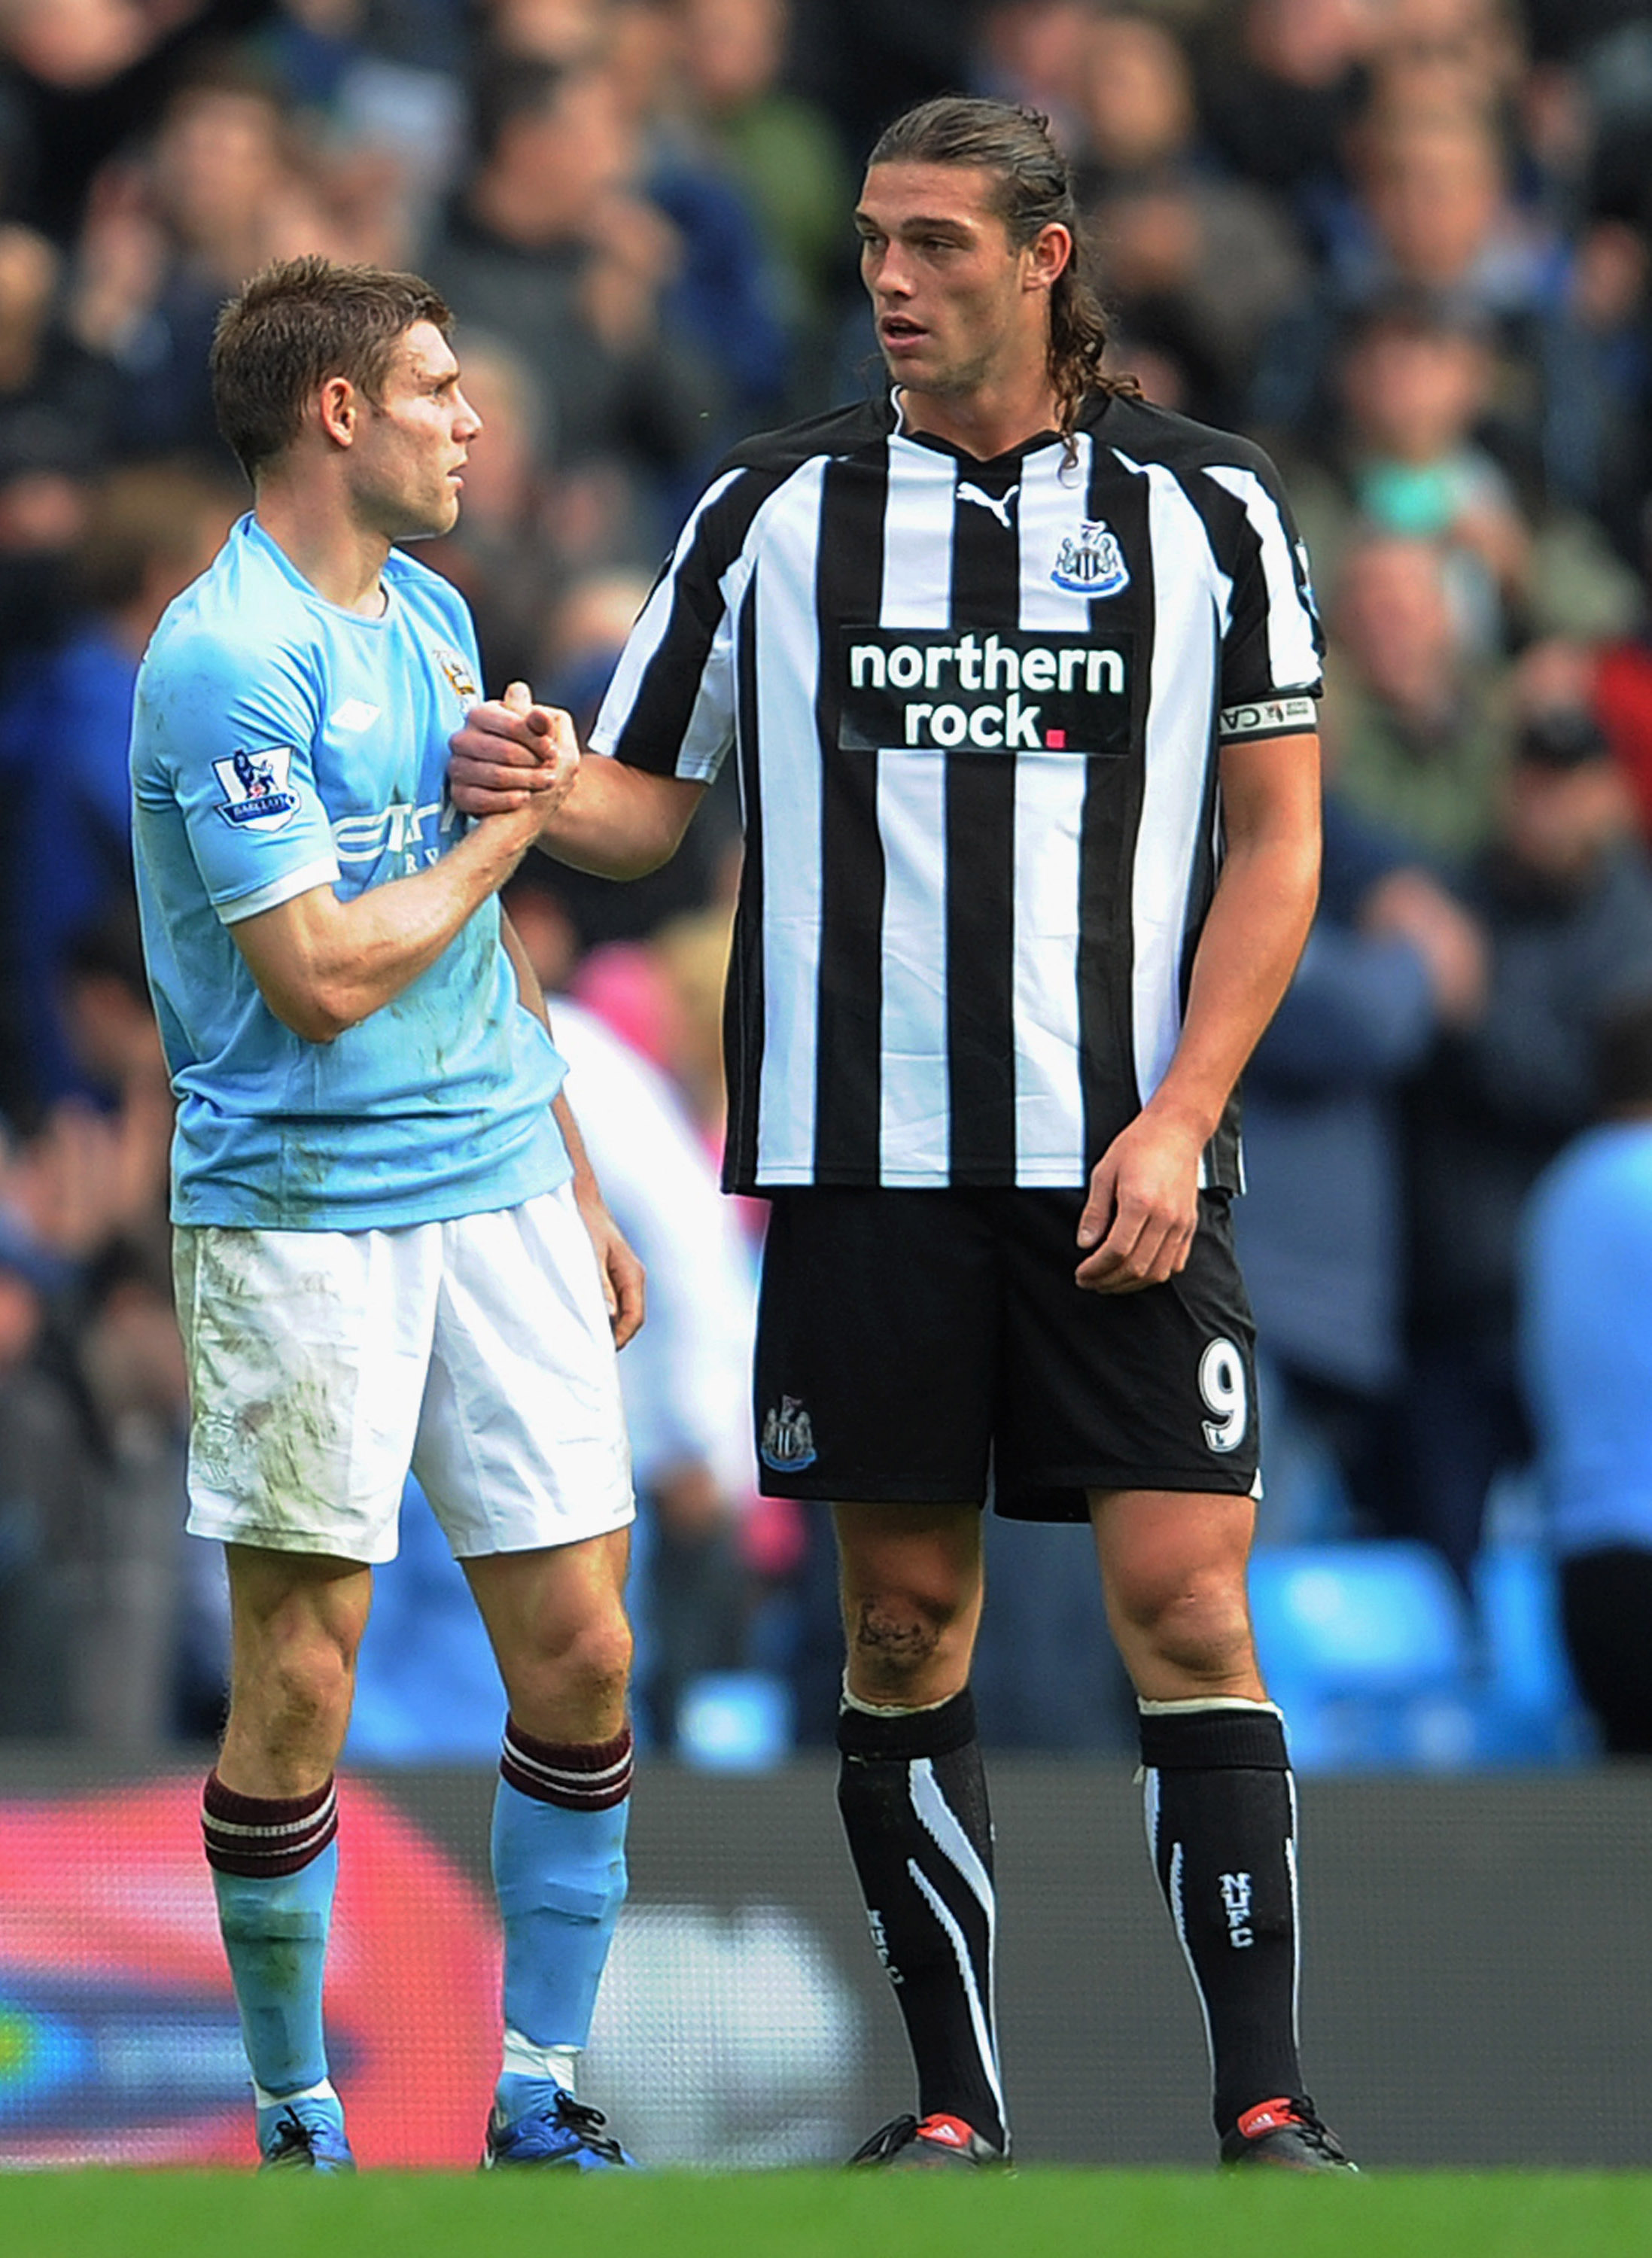 MANCHESTER, ENGLAND - OCTOBER 03: Andy Carroll of Newcastle shakes hands with James Milner of Manchester City after the Barclays Premier League match between Manchester City and Newcastle United at the City of Manchester Stadium on October 3, 2010 in Manc